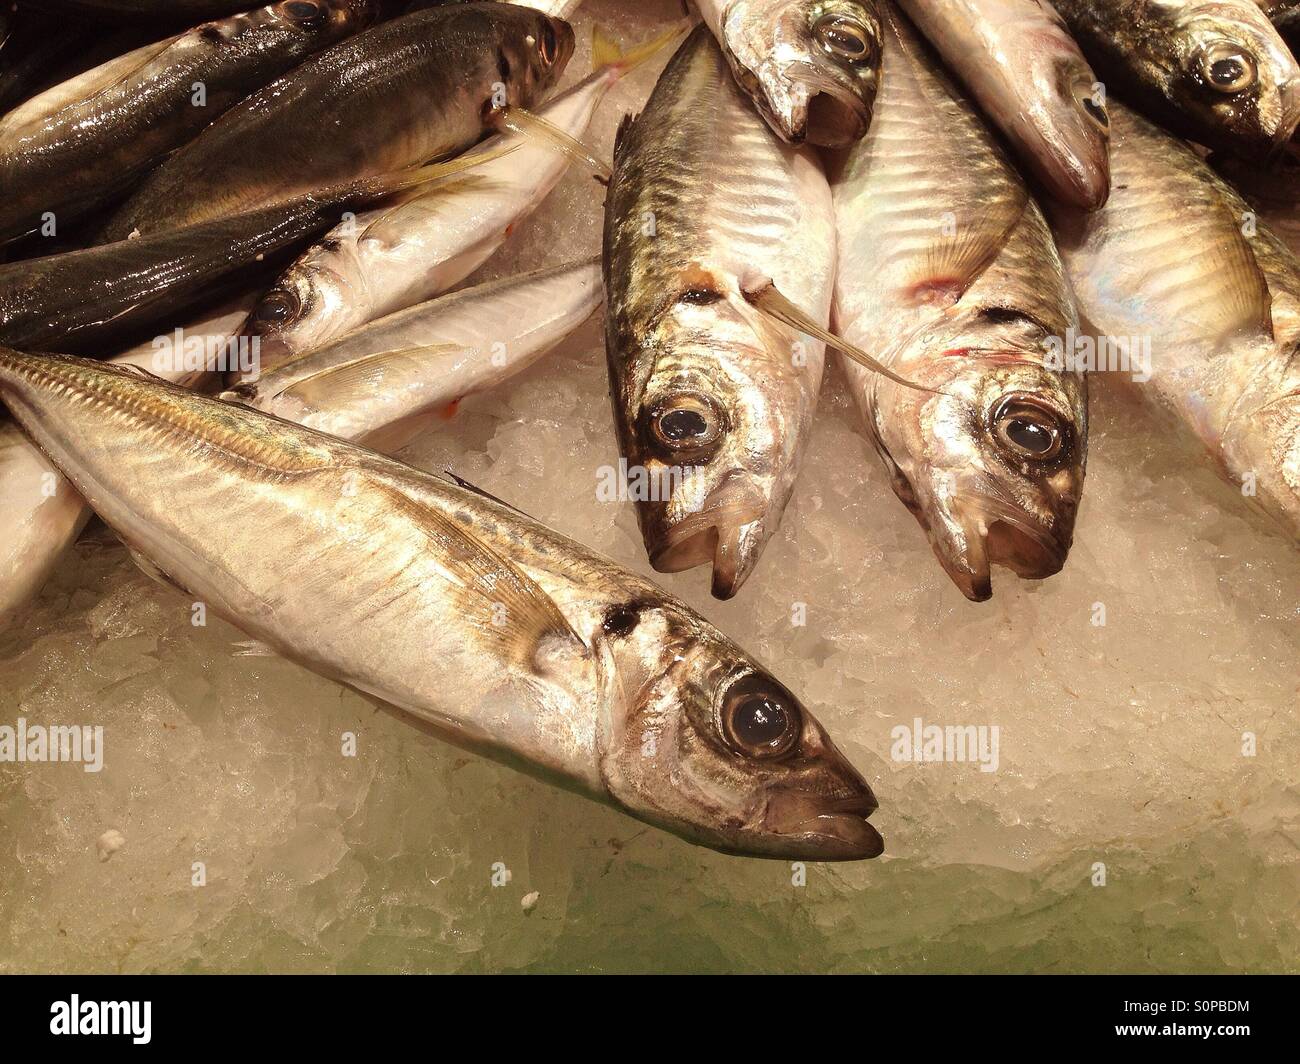 Fresh fish for sale in the market Stock Photo